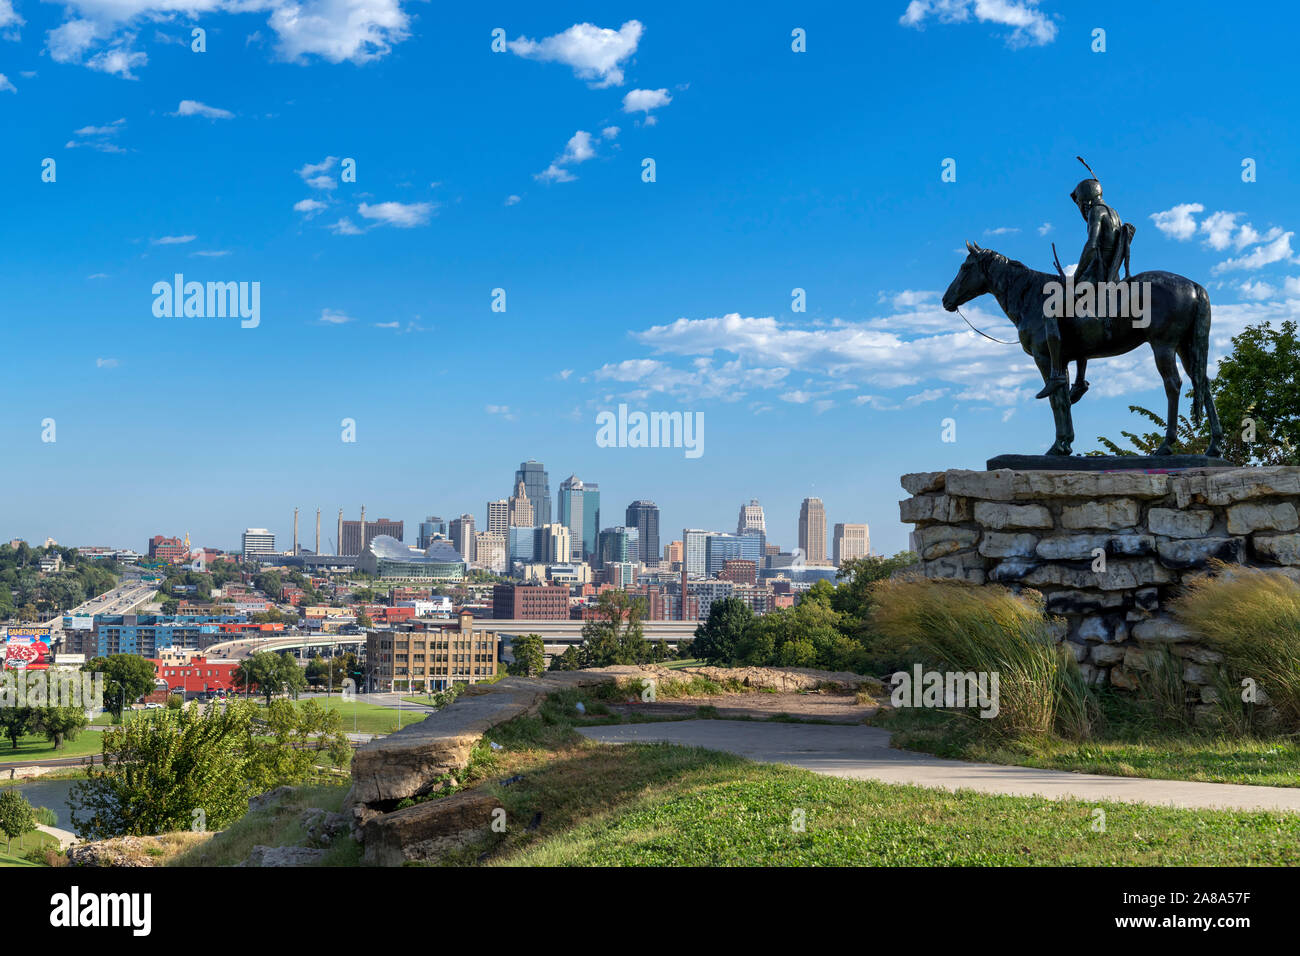 View of downtown skyline from Penn Valley Park, Kansas City, Missouri, USA. Cyrus Dallin's statue of a Sioux Indan, The Scout, is in the foreground. Stock Photo